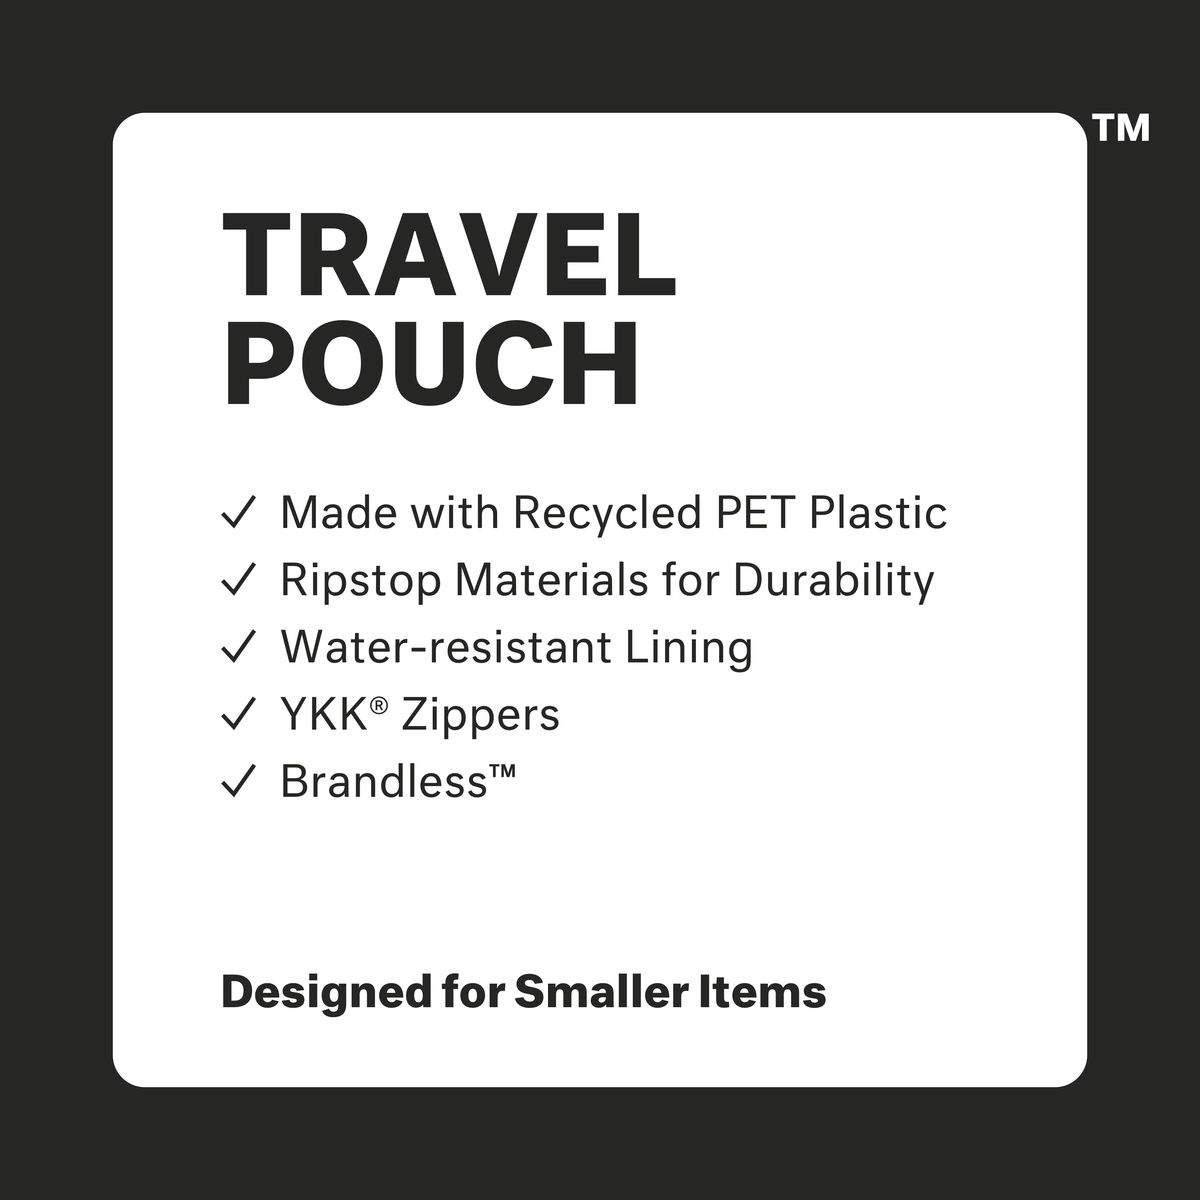 Travel Pouch: made with recycled PET plastic, ripstop materials for durability, water-resistant lining, ykk zippers, brandless. Designed for smaller items